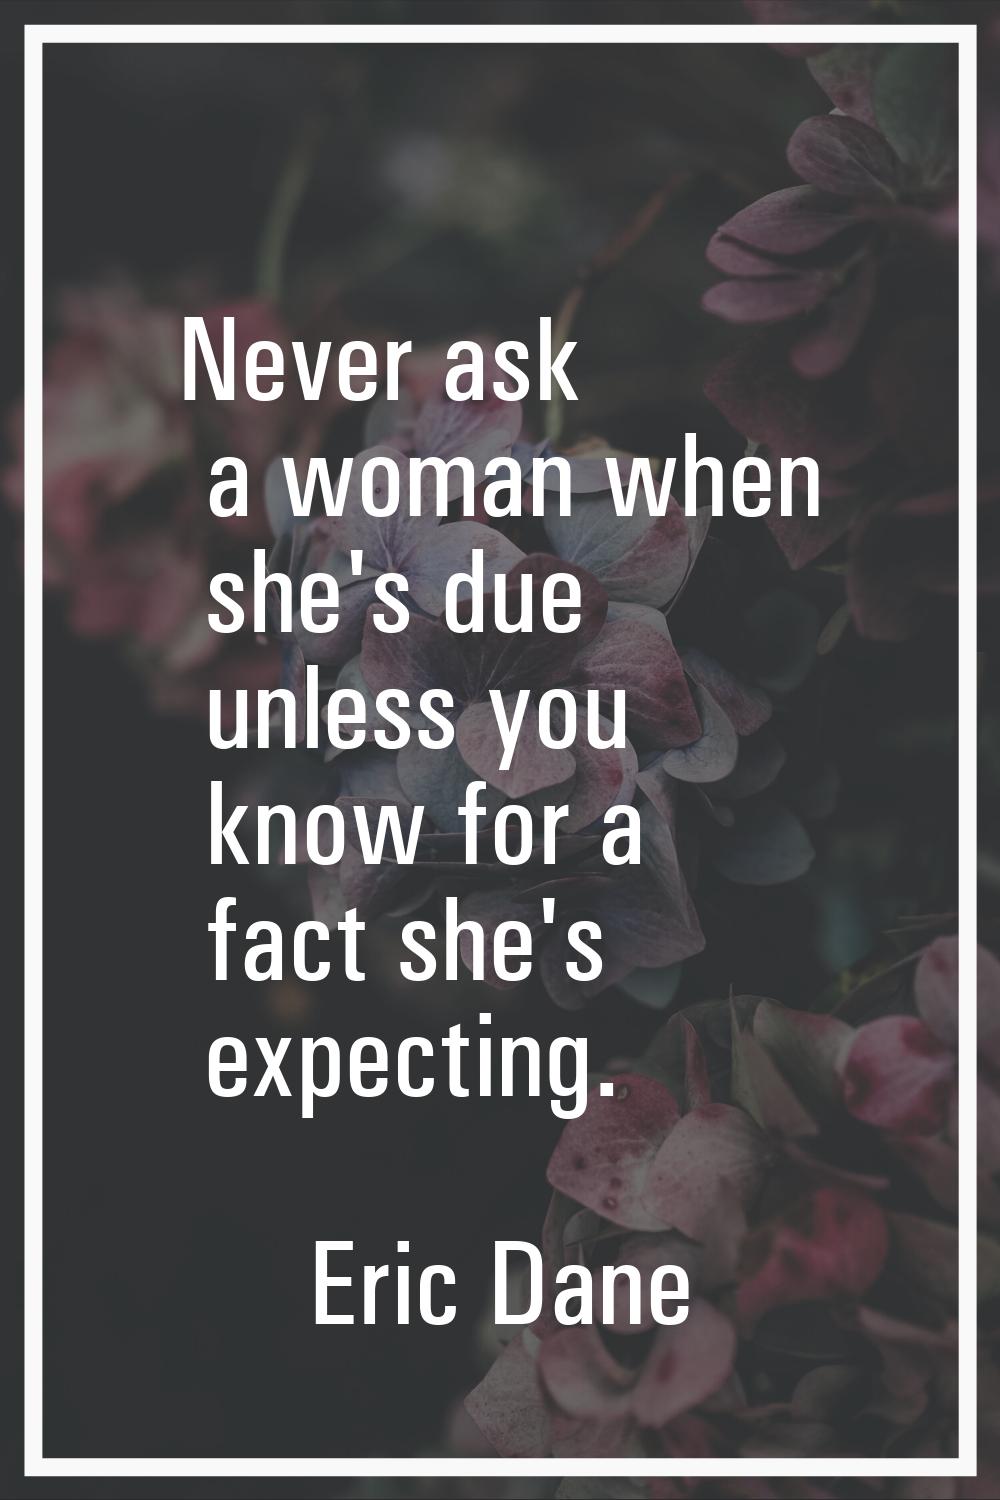 Never ask a woman when she's due unless you know for a fact she's expecting.